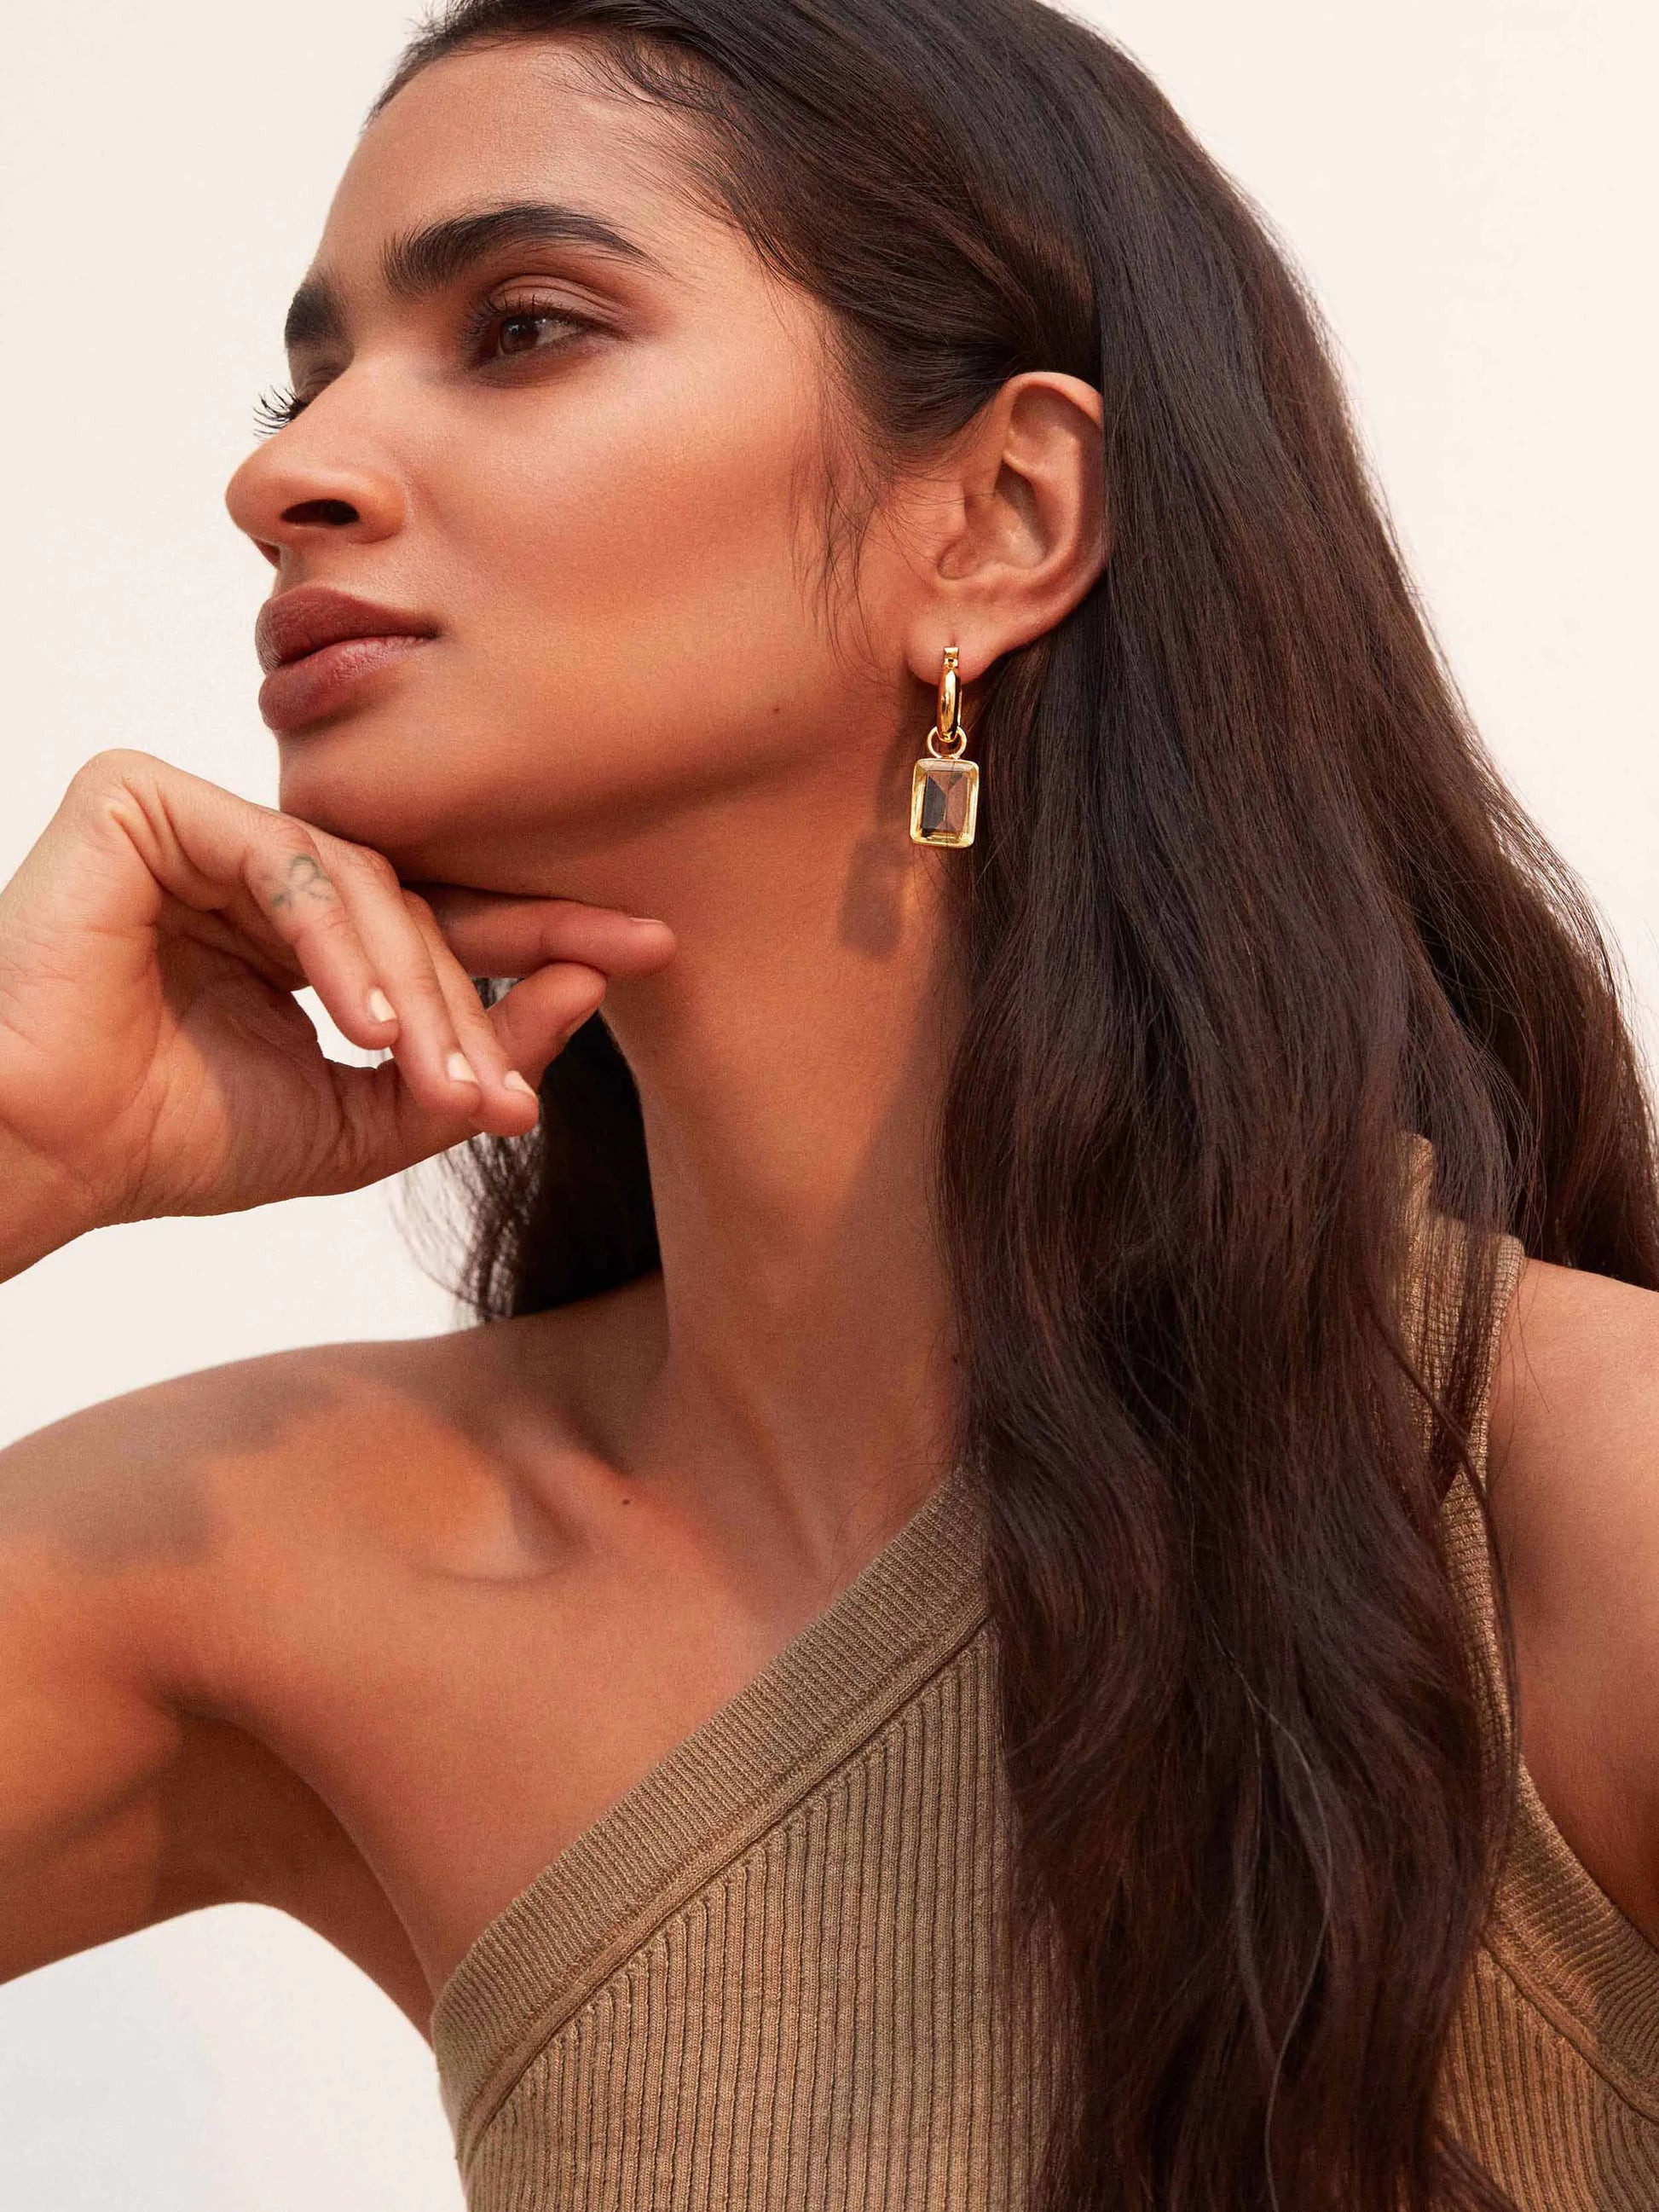 A woman wearing a tan top and SHYLA - Sorrento Hoops- Gold earrings by Shyla.